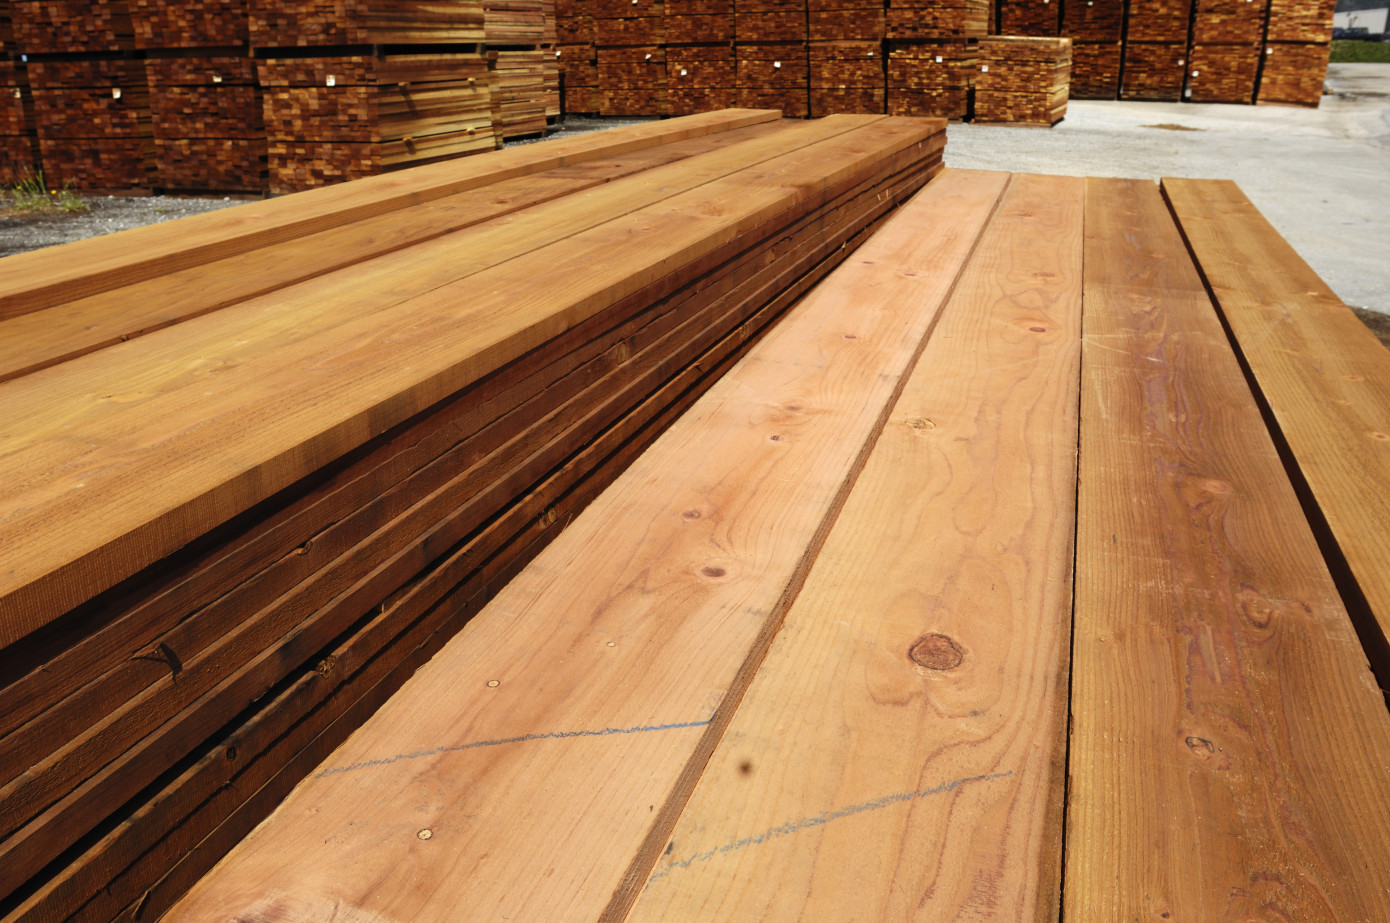 Exports of lumber from Brazil decrease 29% in March